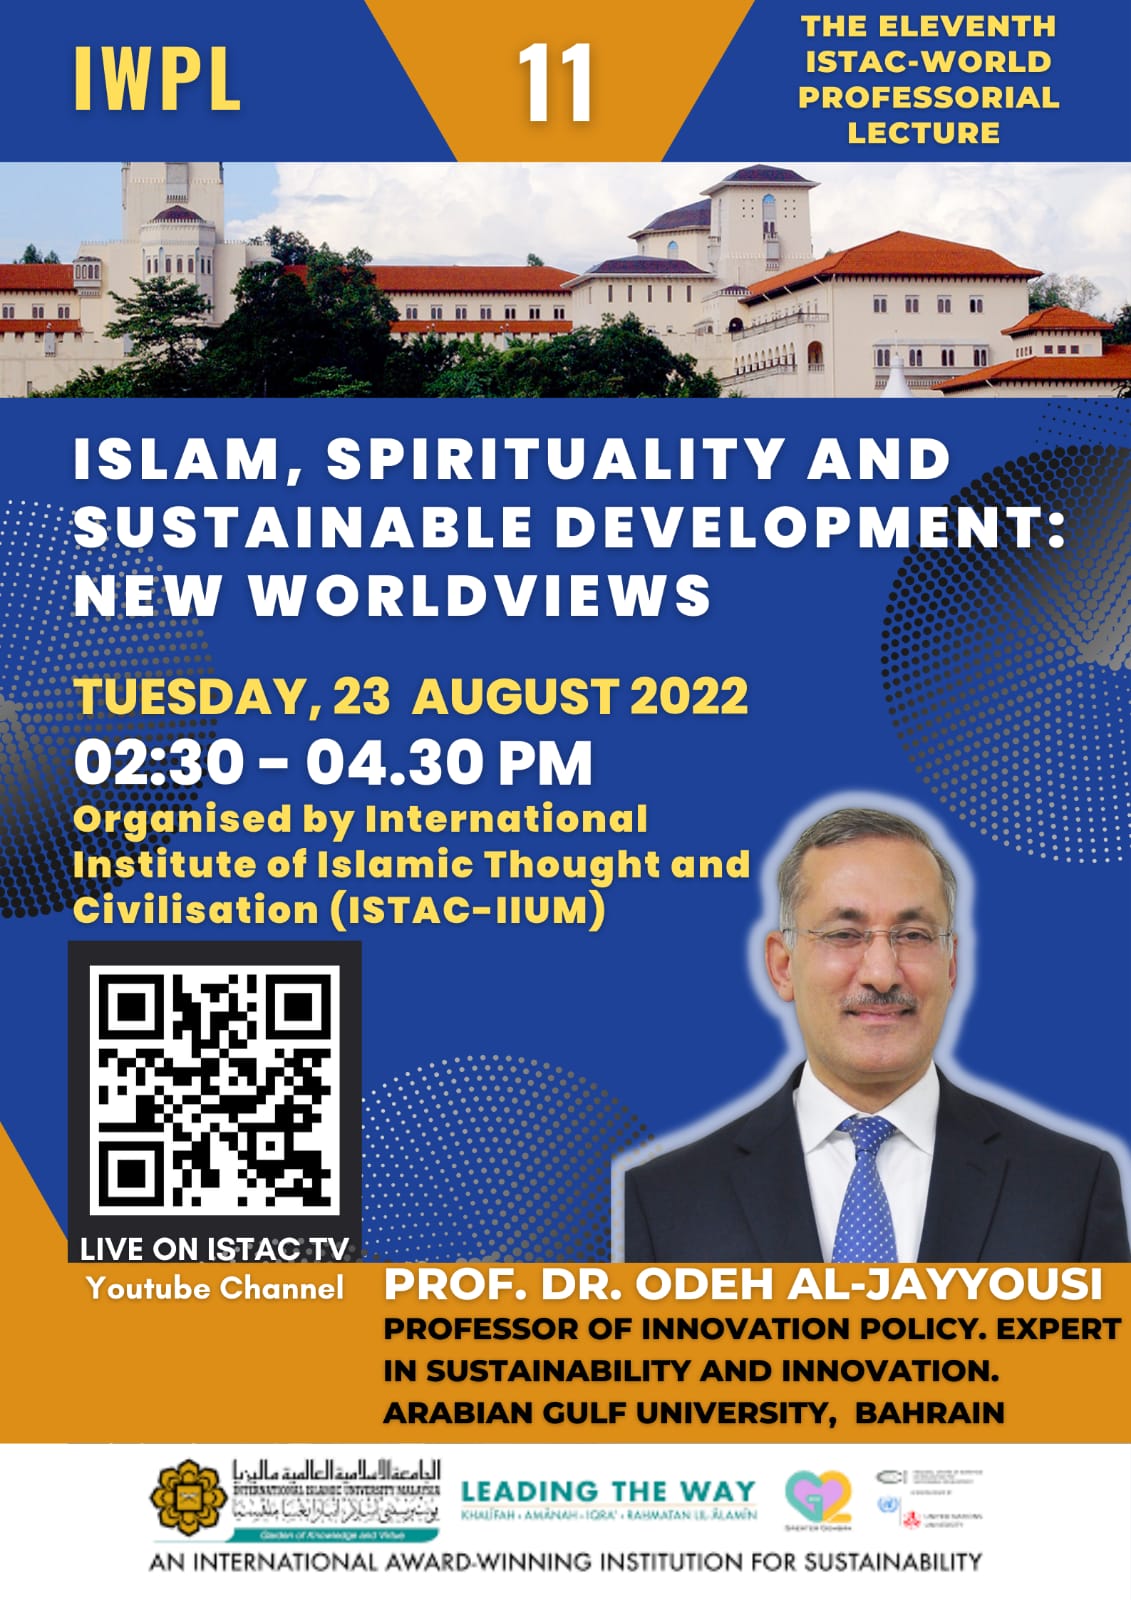 THE ELEVENTH ISTAC-WORLD PROFESSORIAL LECTURE (IWPL 11)